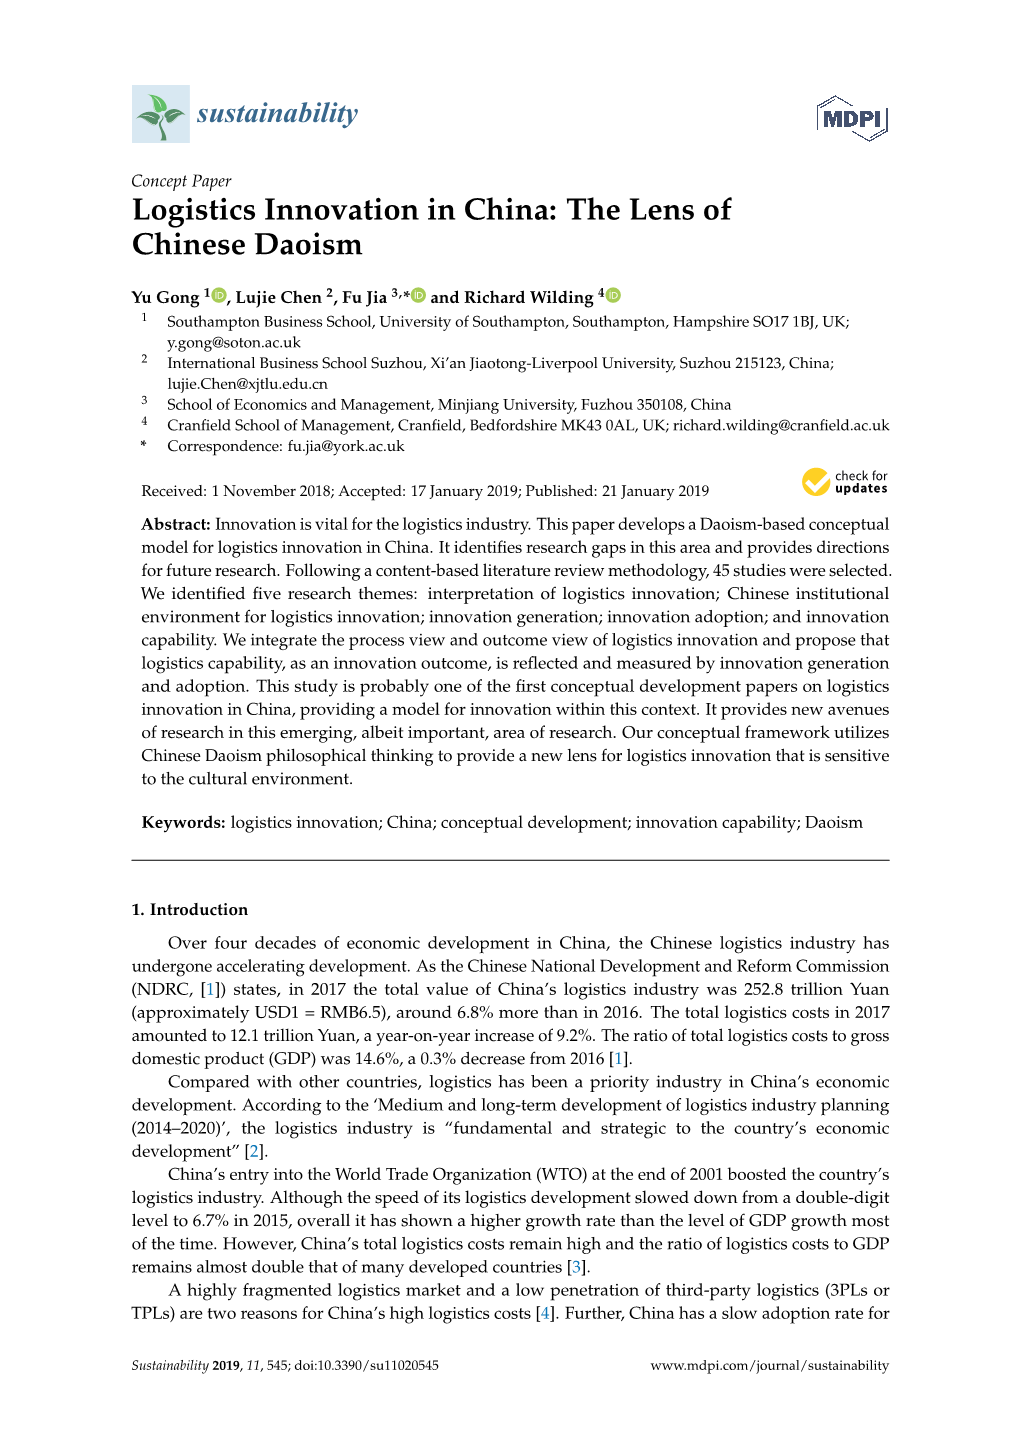 Logistics Innovation in China: the Lens of Chinese Daoism